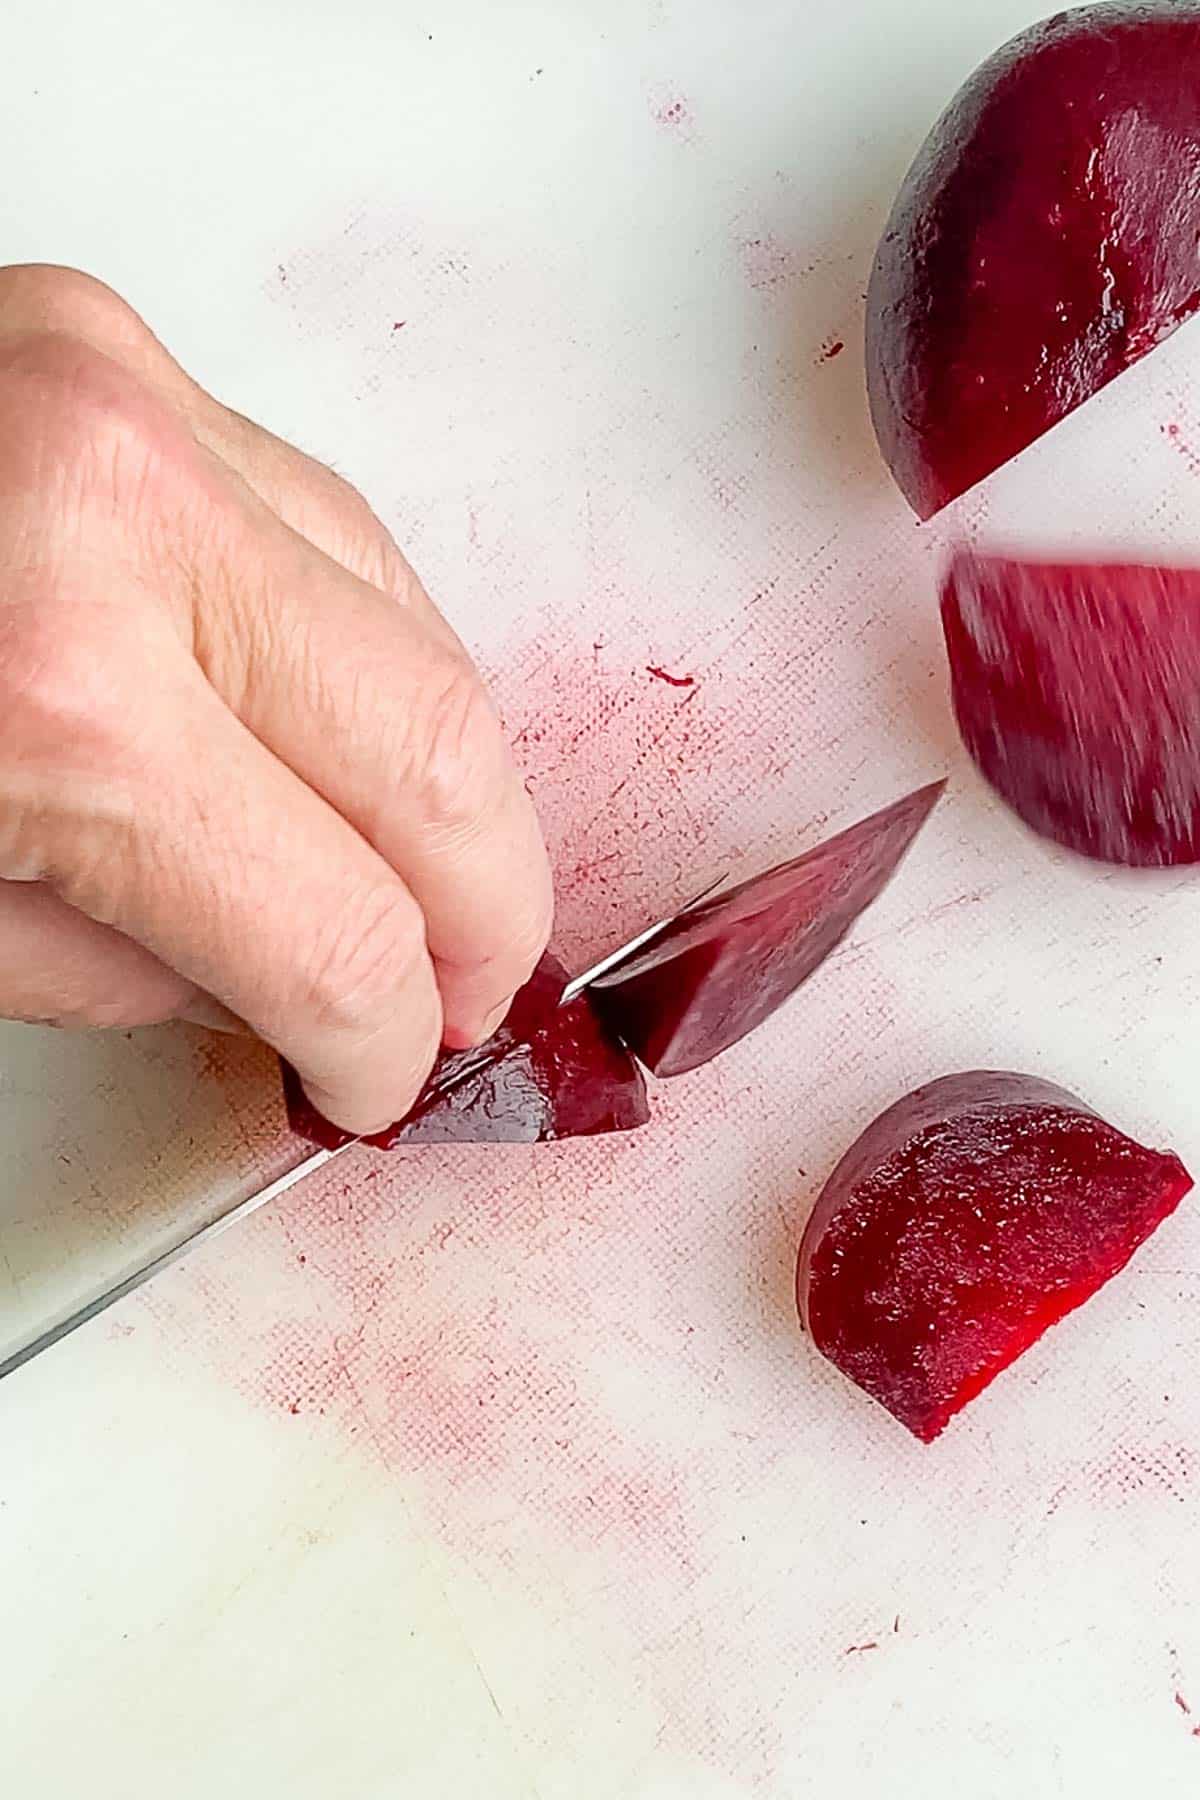 red beets are being sliced for pickled beets